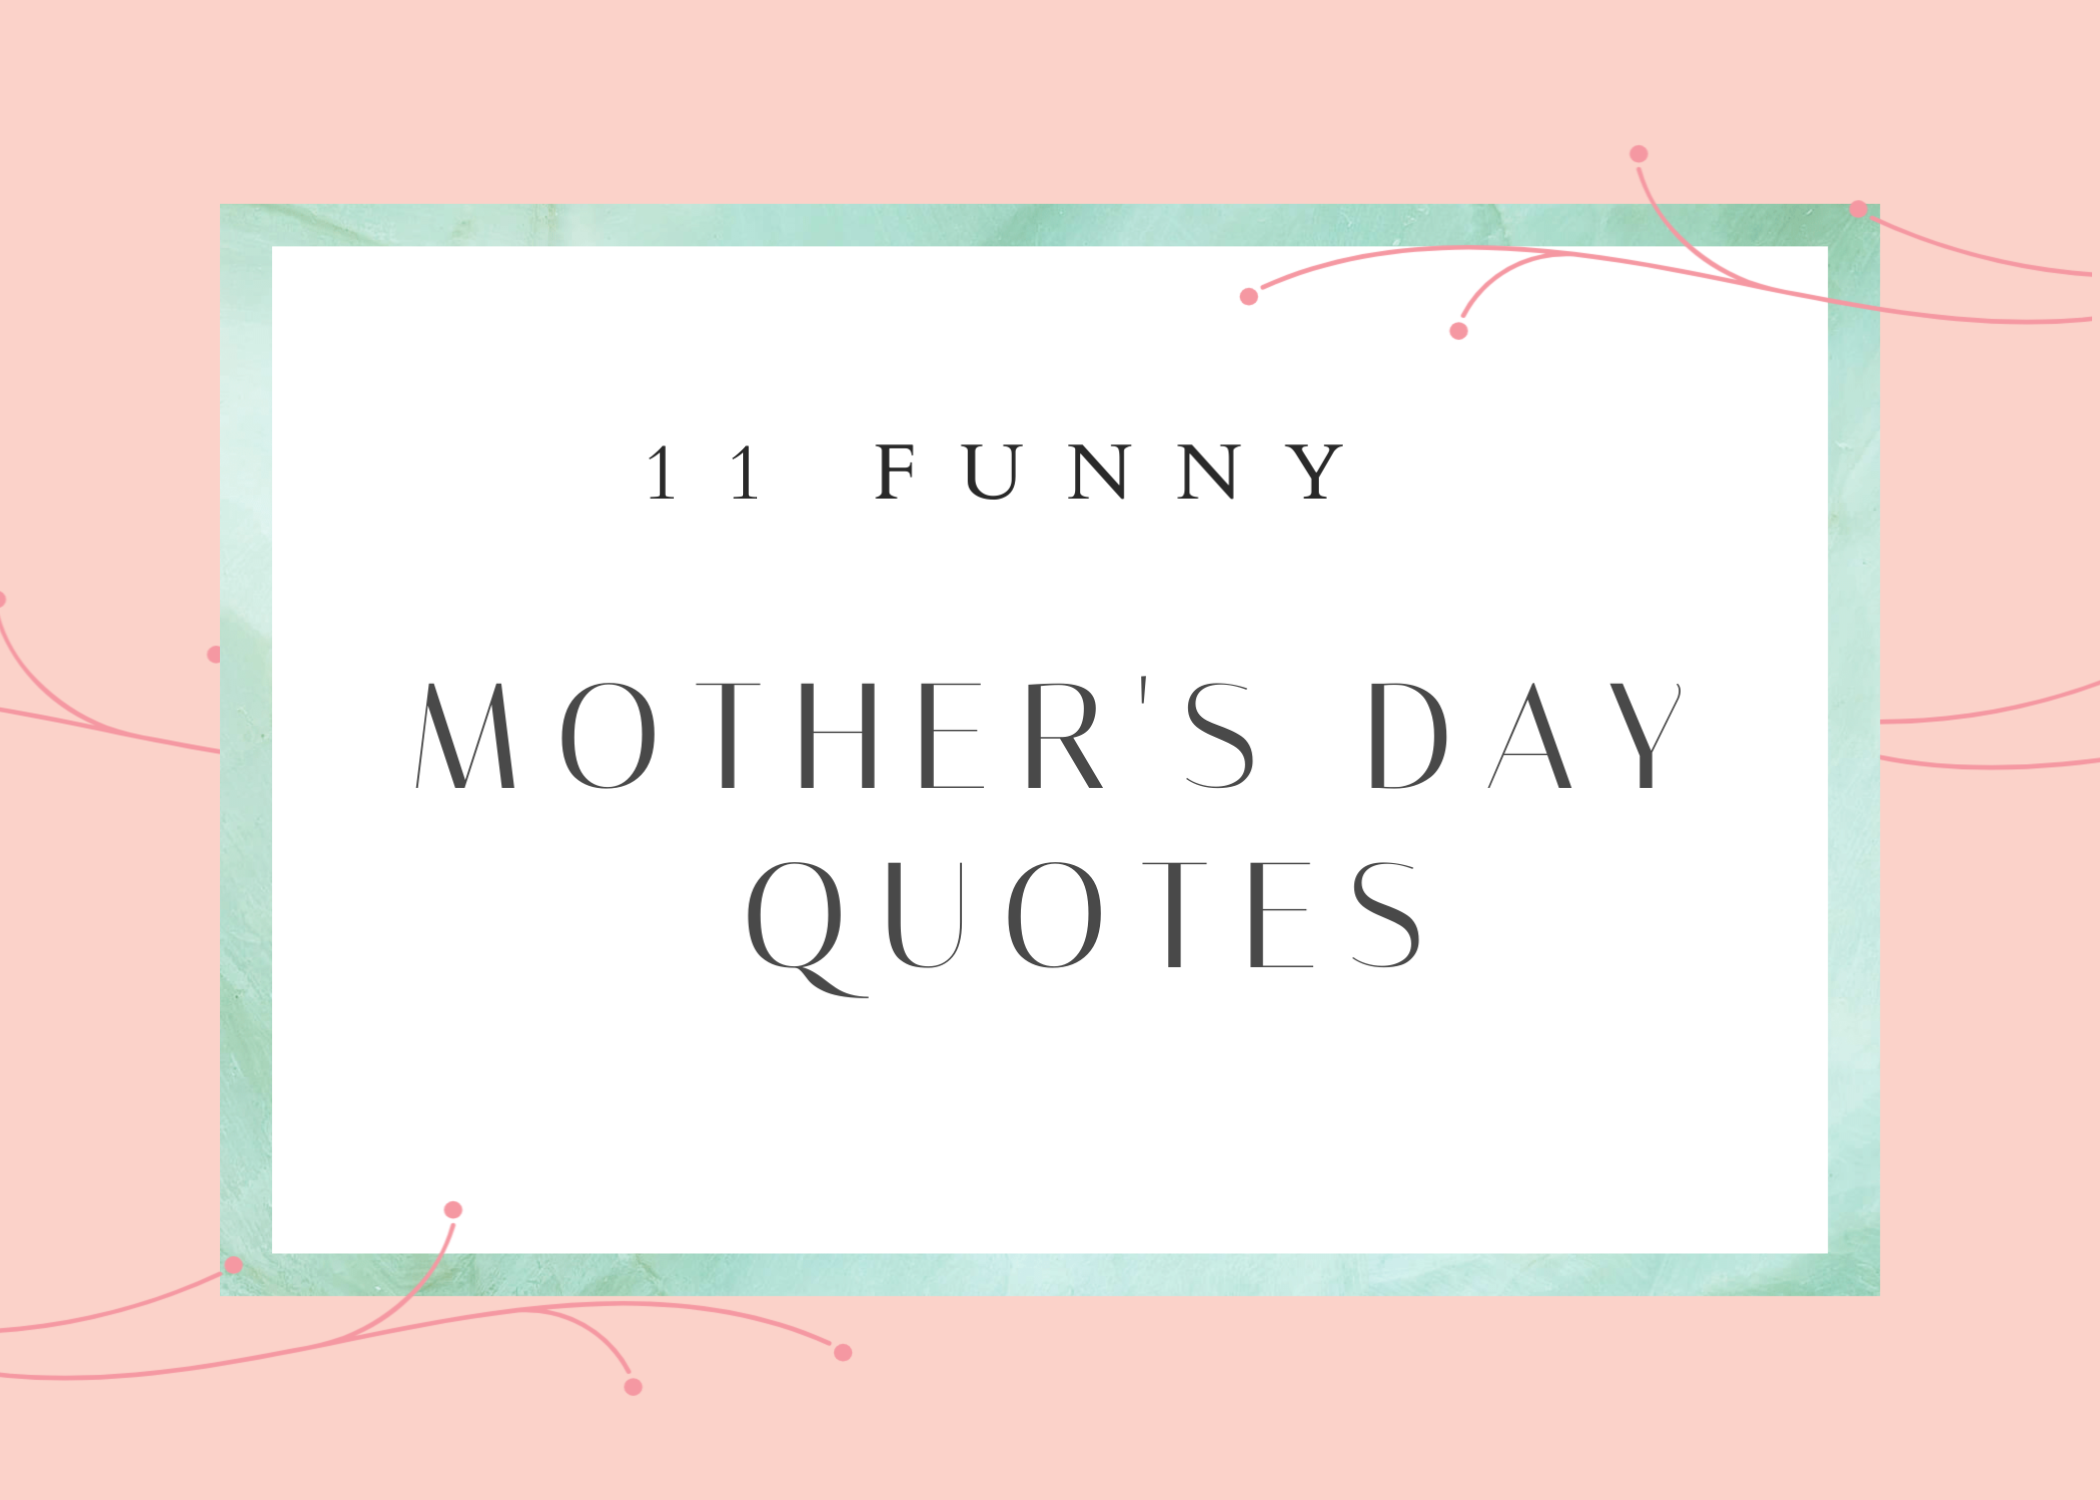 11 Funny Mother's Day Quotes to Celebrate Mom | Gourmet Meat & Sausage Shop